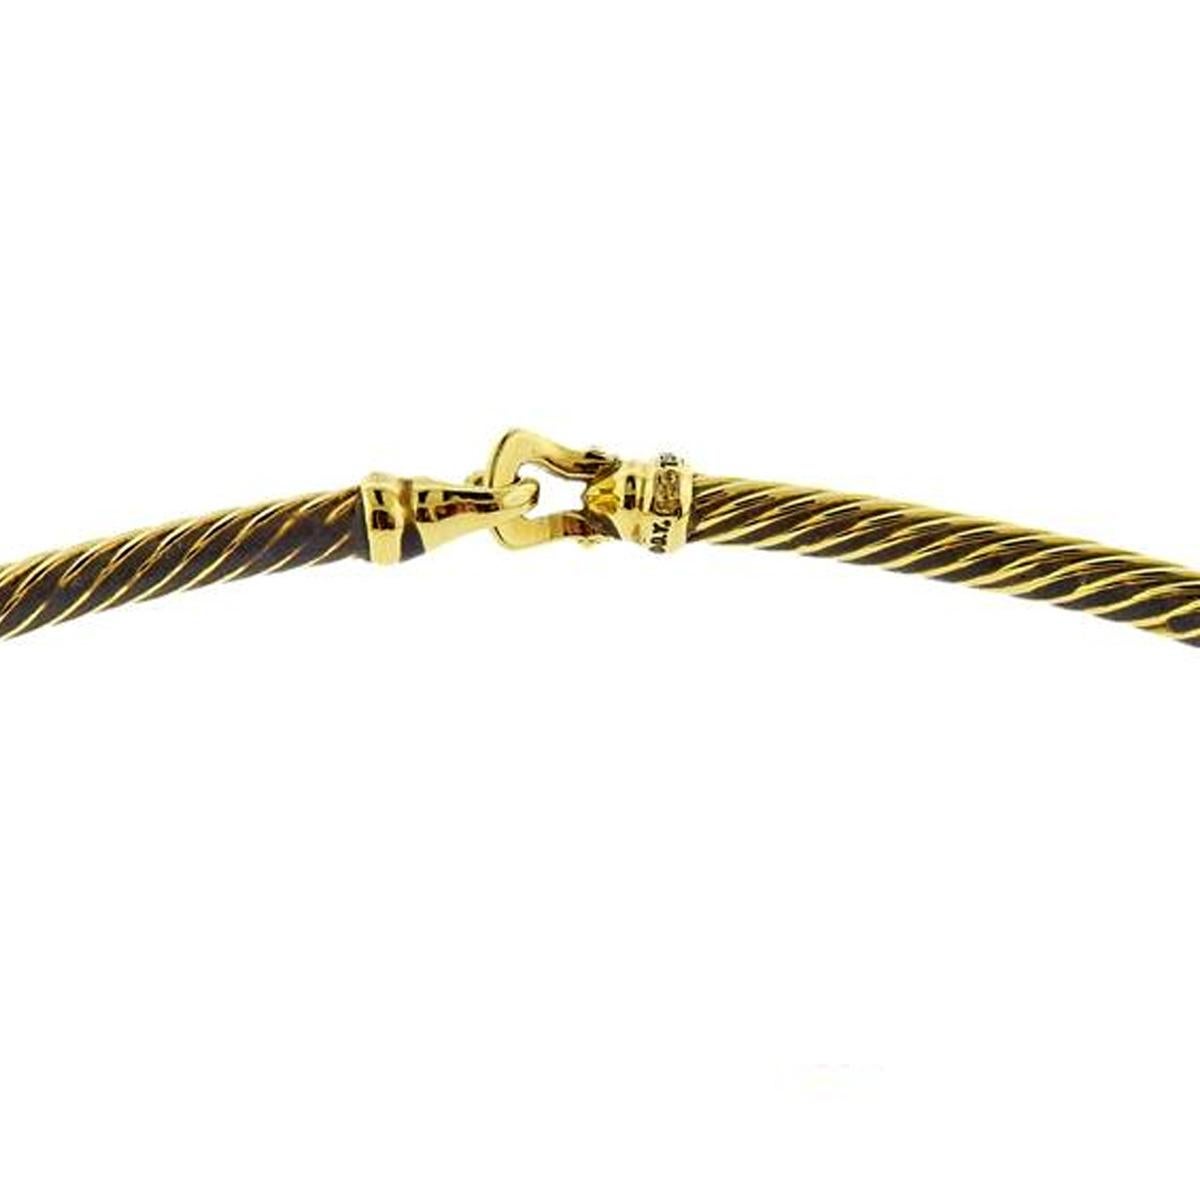 A chic David Yurman choker necklace crafted in 18k yellow gold. The necklace measures 4mm wide and has a length of 15.5